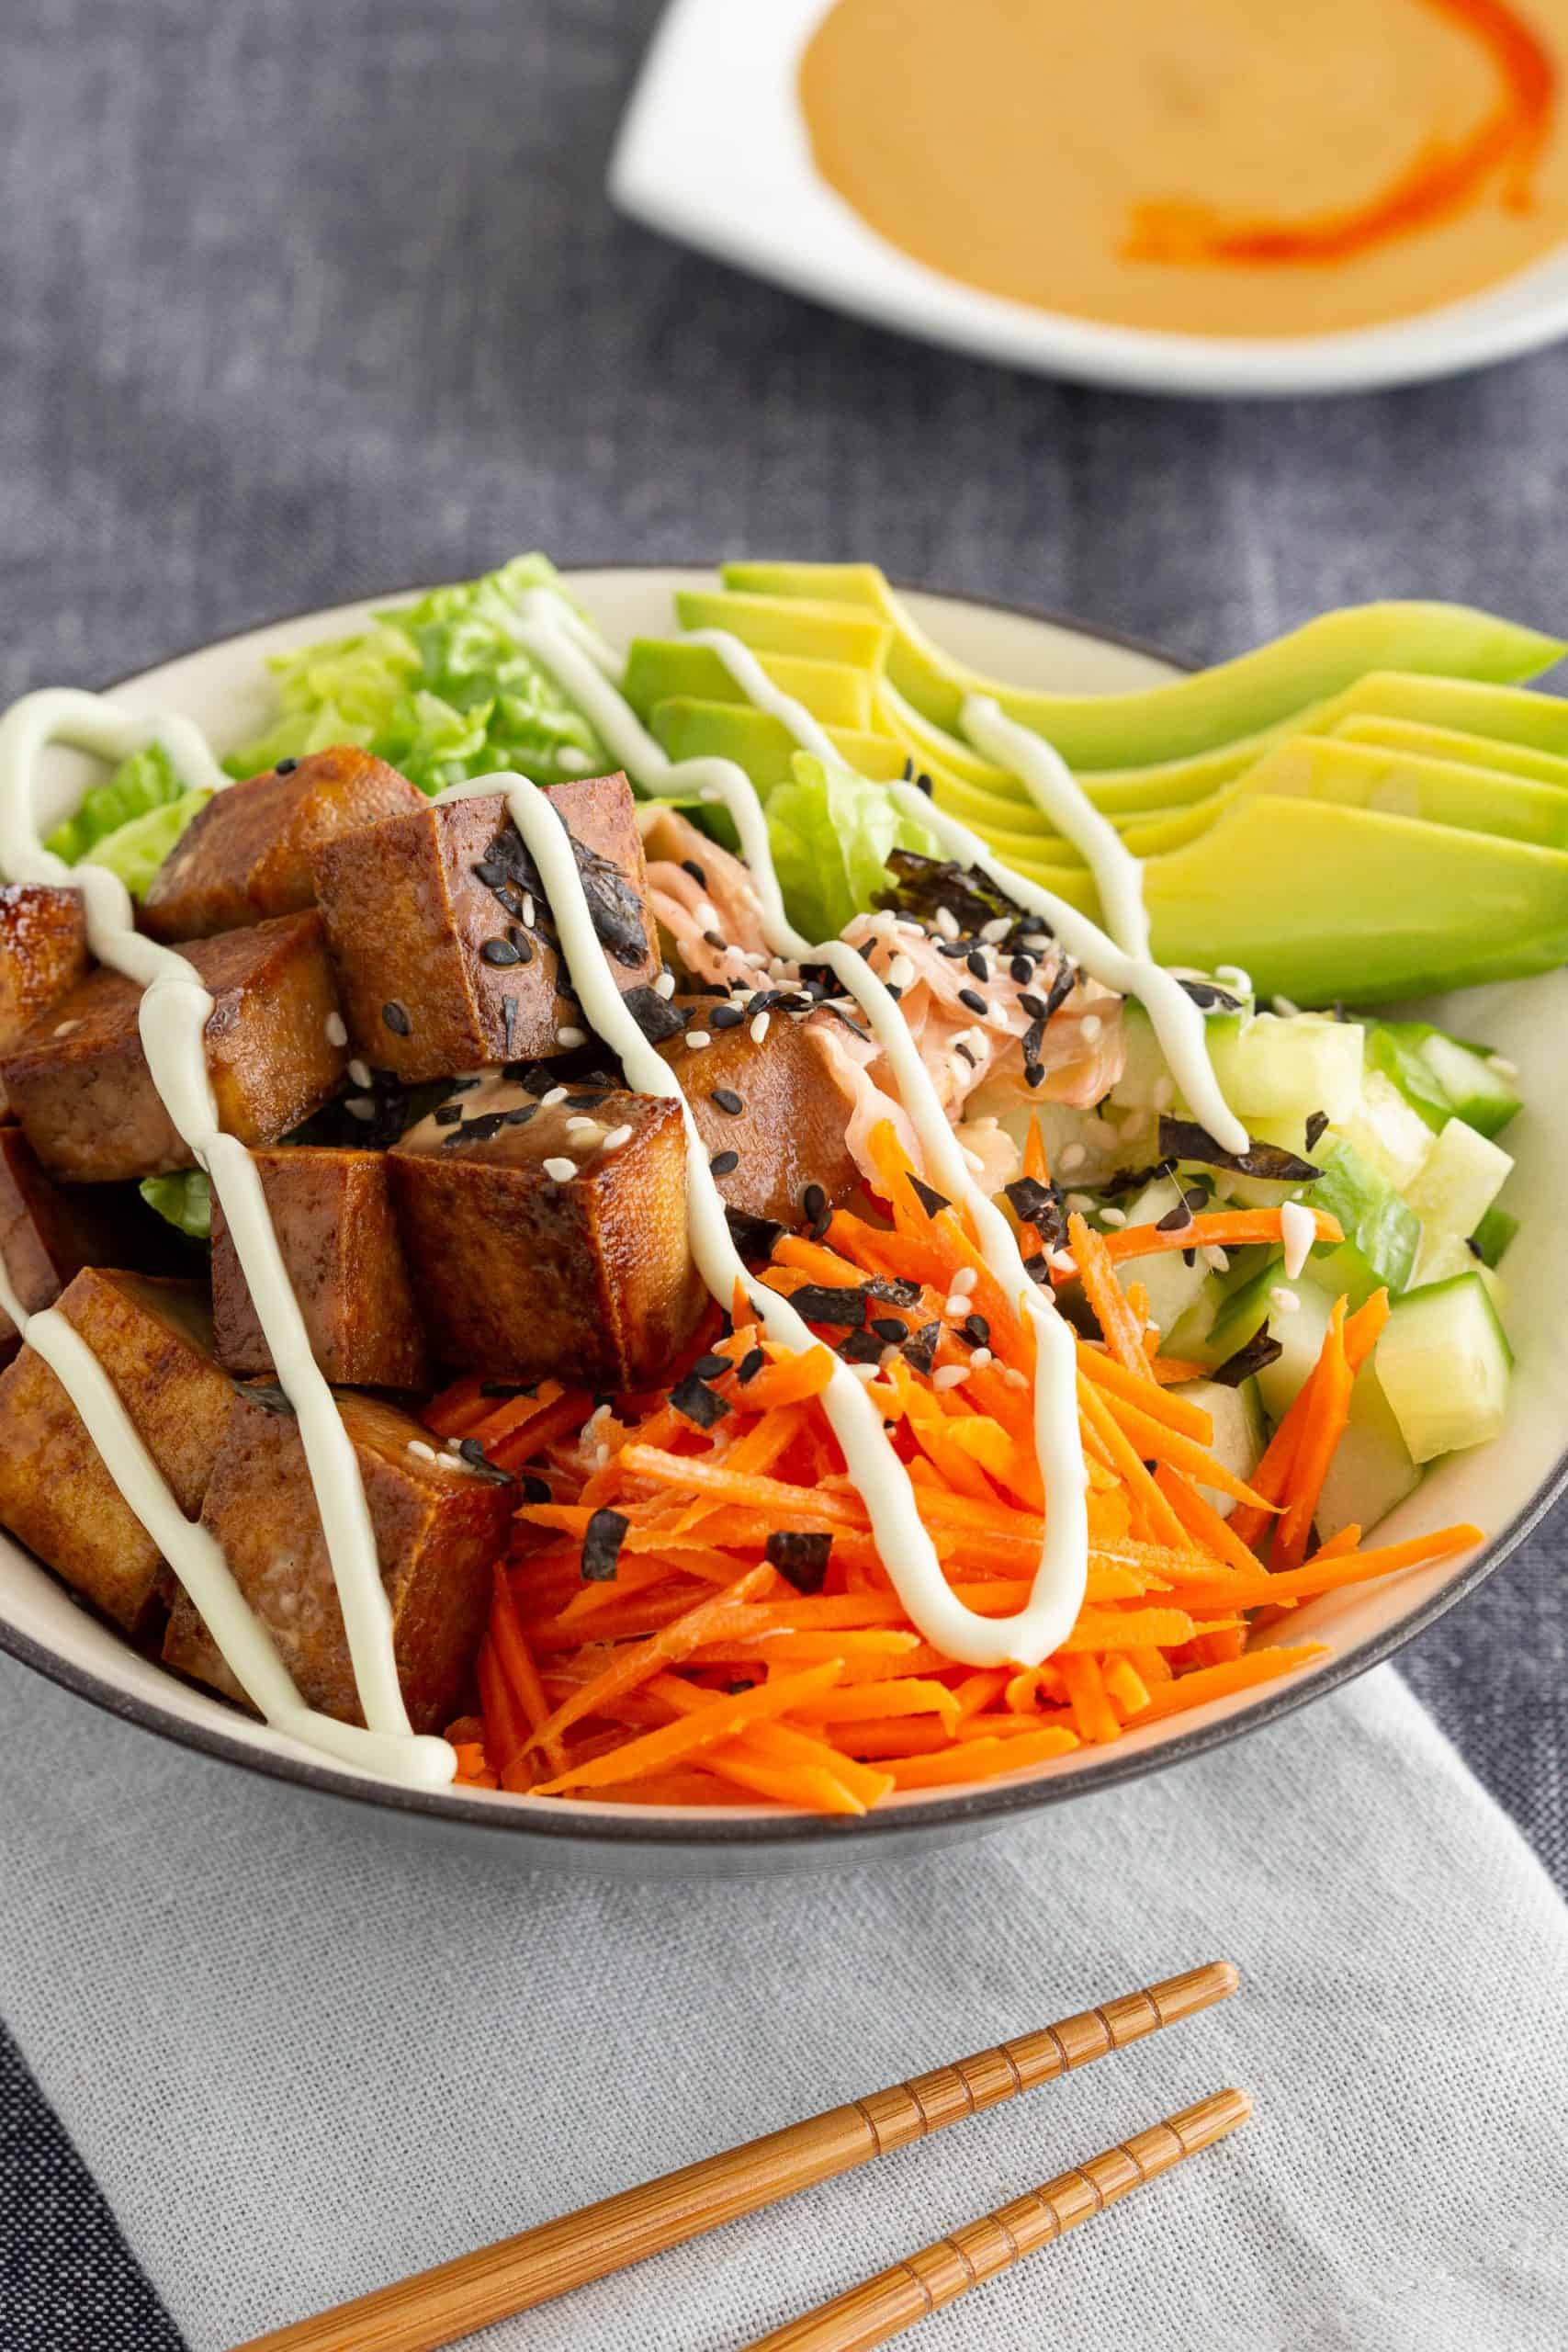 A colourful sushi bowl with tofu and vegetables, next to a bowl of sauce.